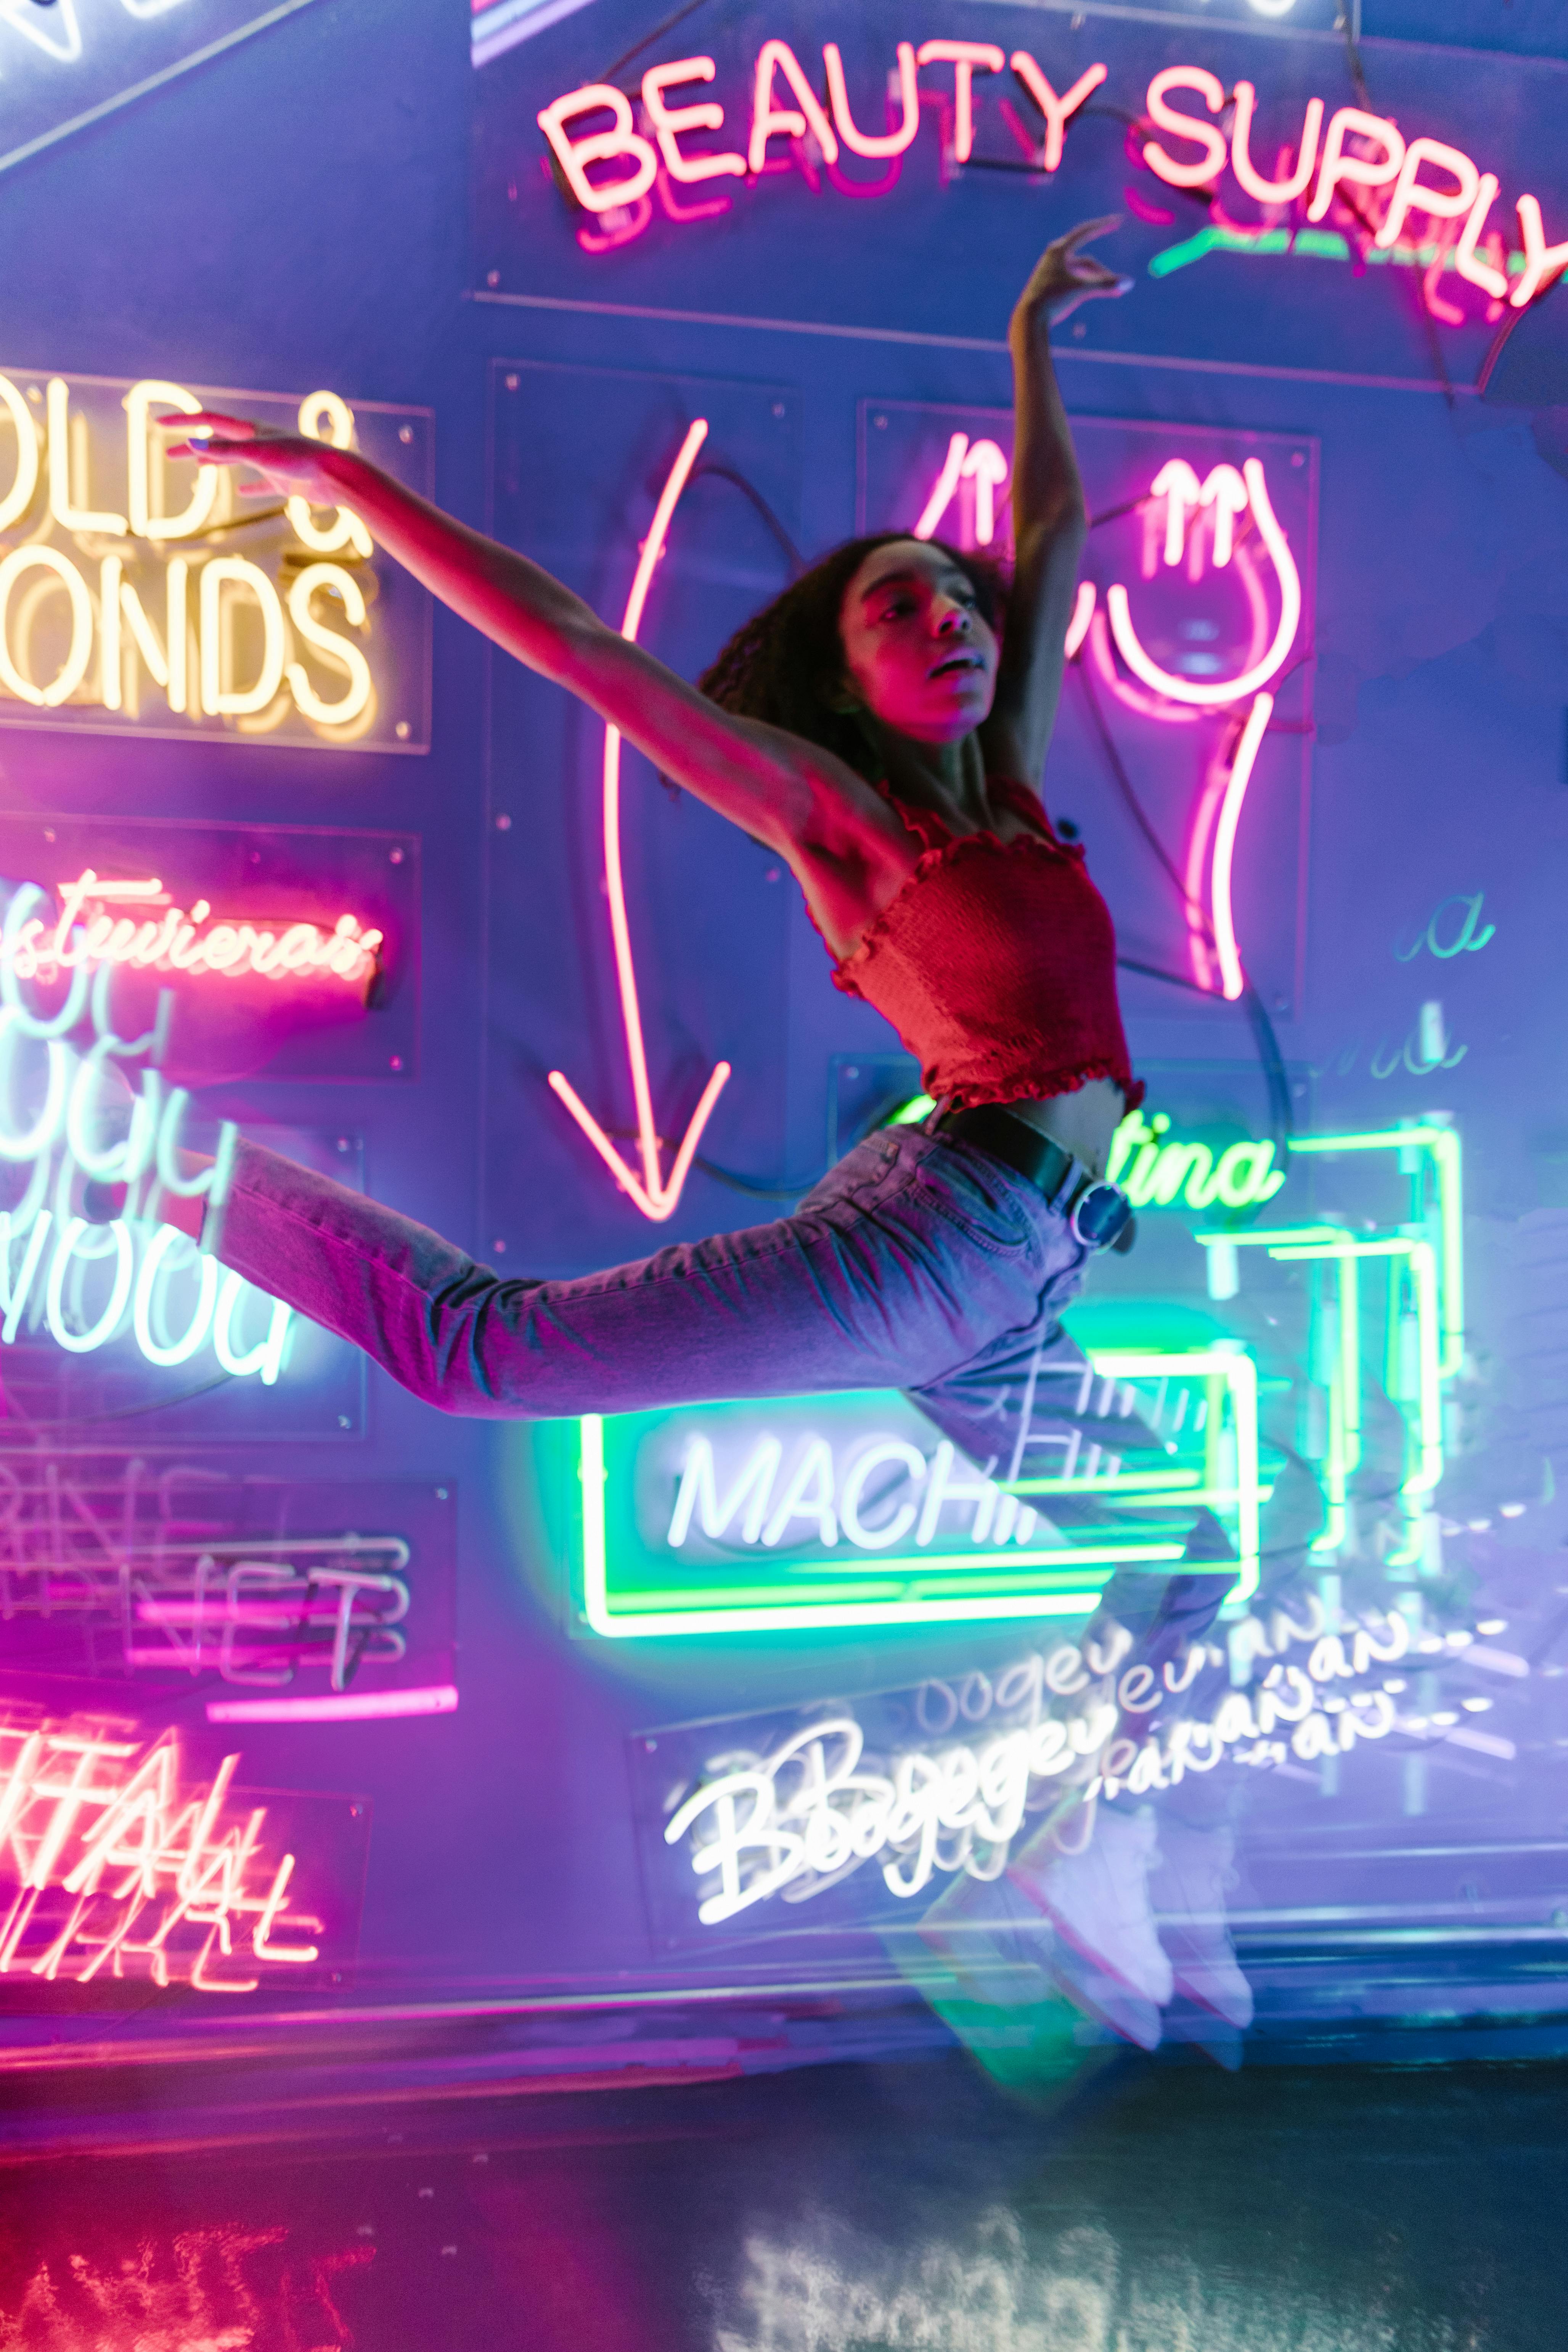 a woman midair in front of a wall with neon signs